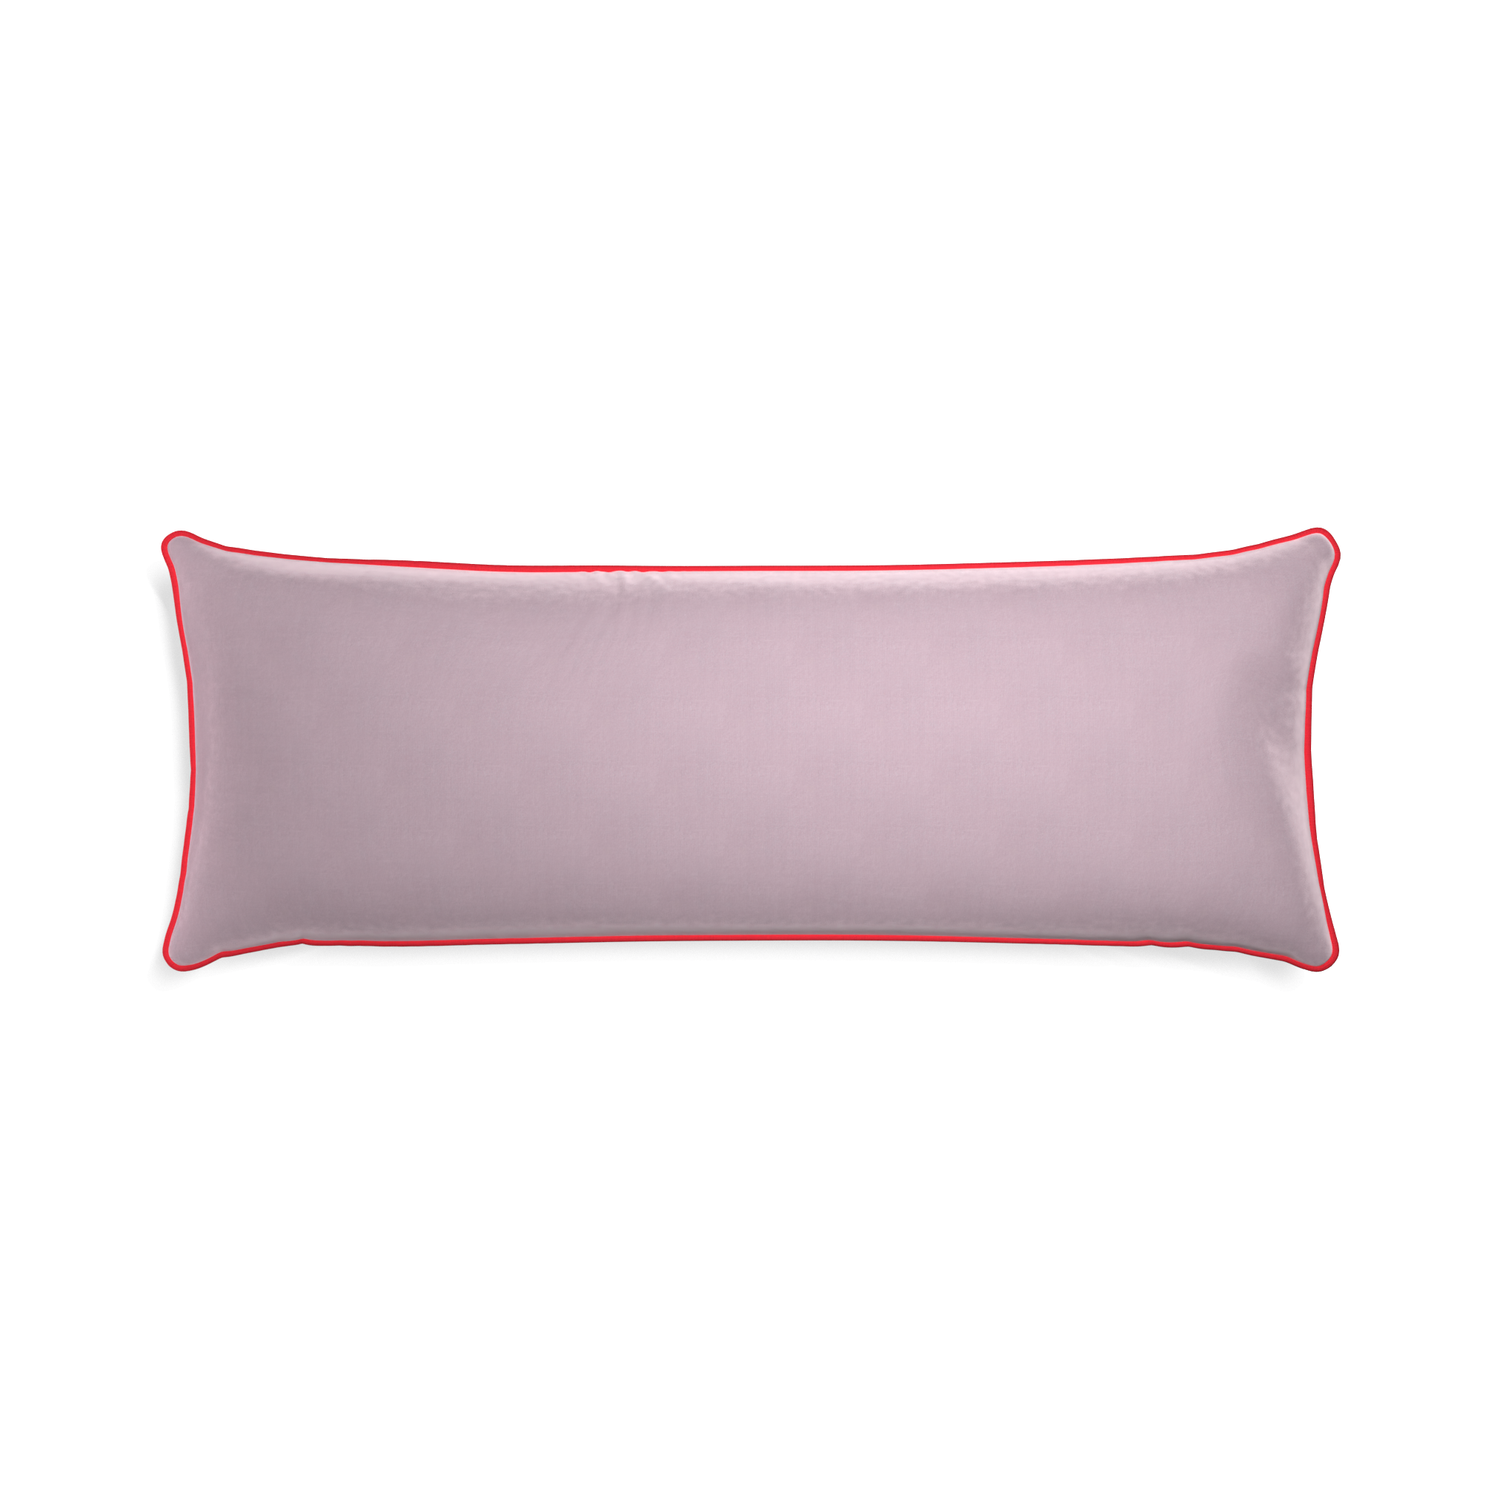 Xl-lumbar lilac velvet custom pillow with cherry piping on white background